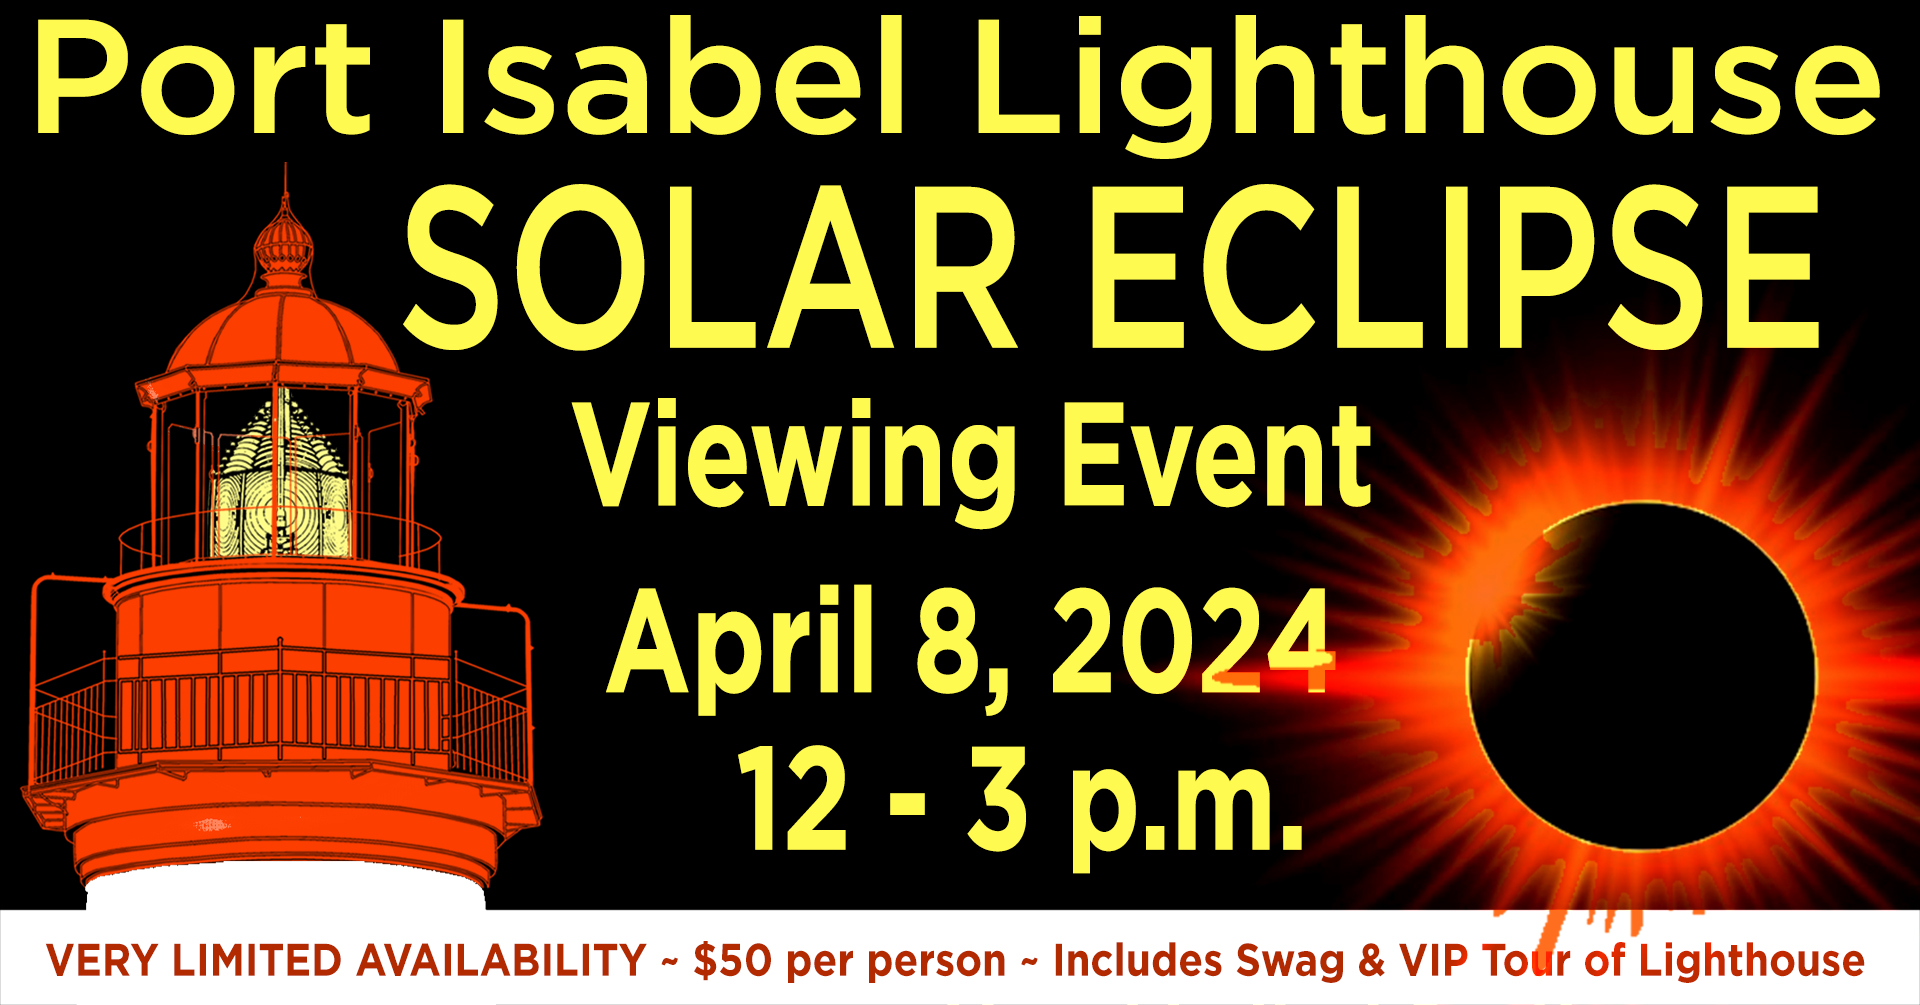 Solar Eclipse Viewing Event 4/8/24